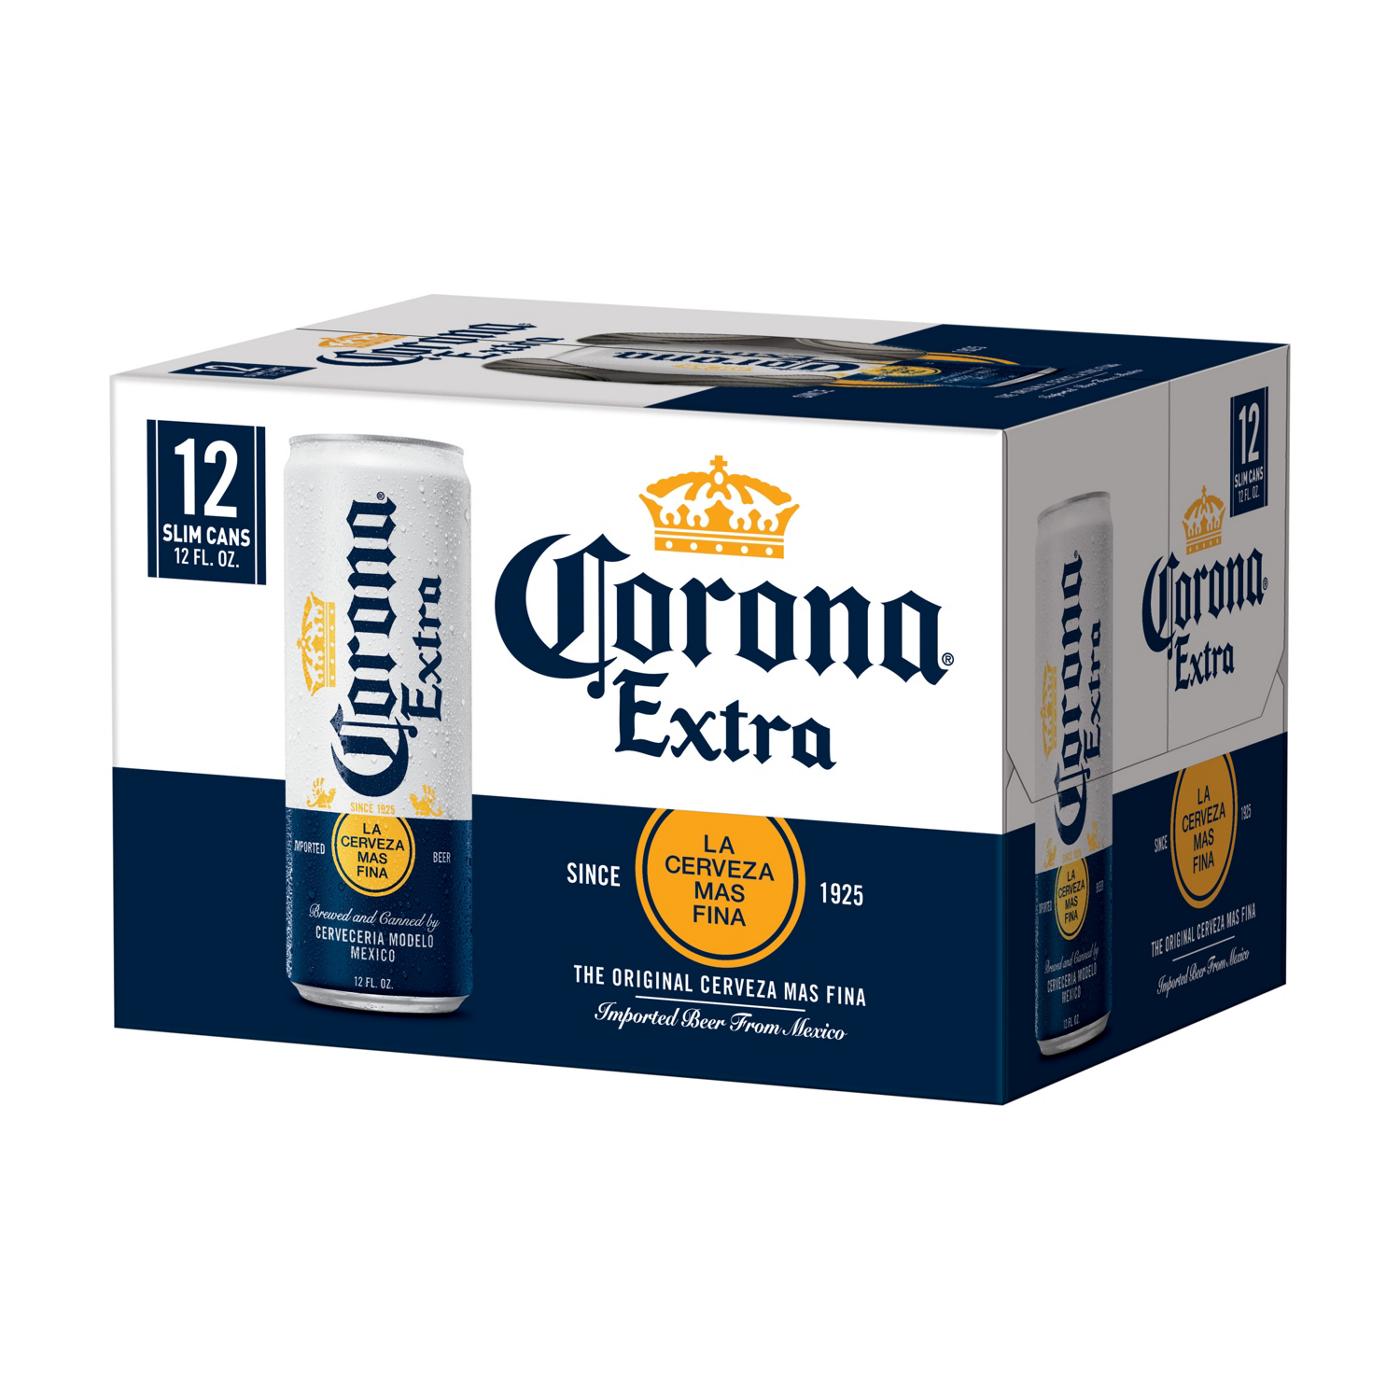 Corona Extra Mexican Lager Import Beer 12 oz Cans, 12 pk; image 2 of 6